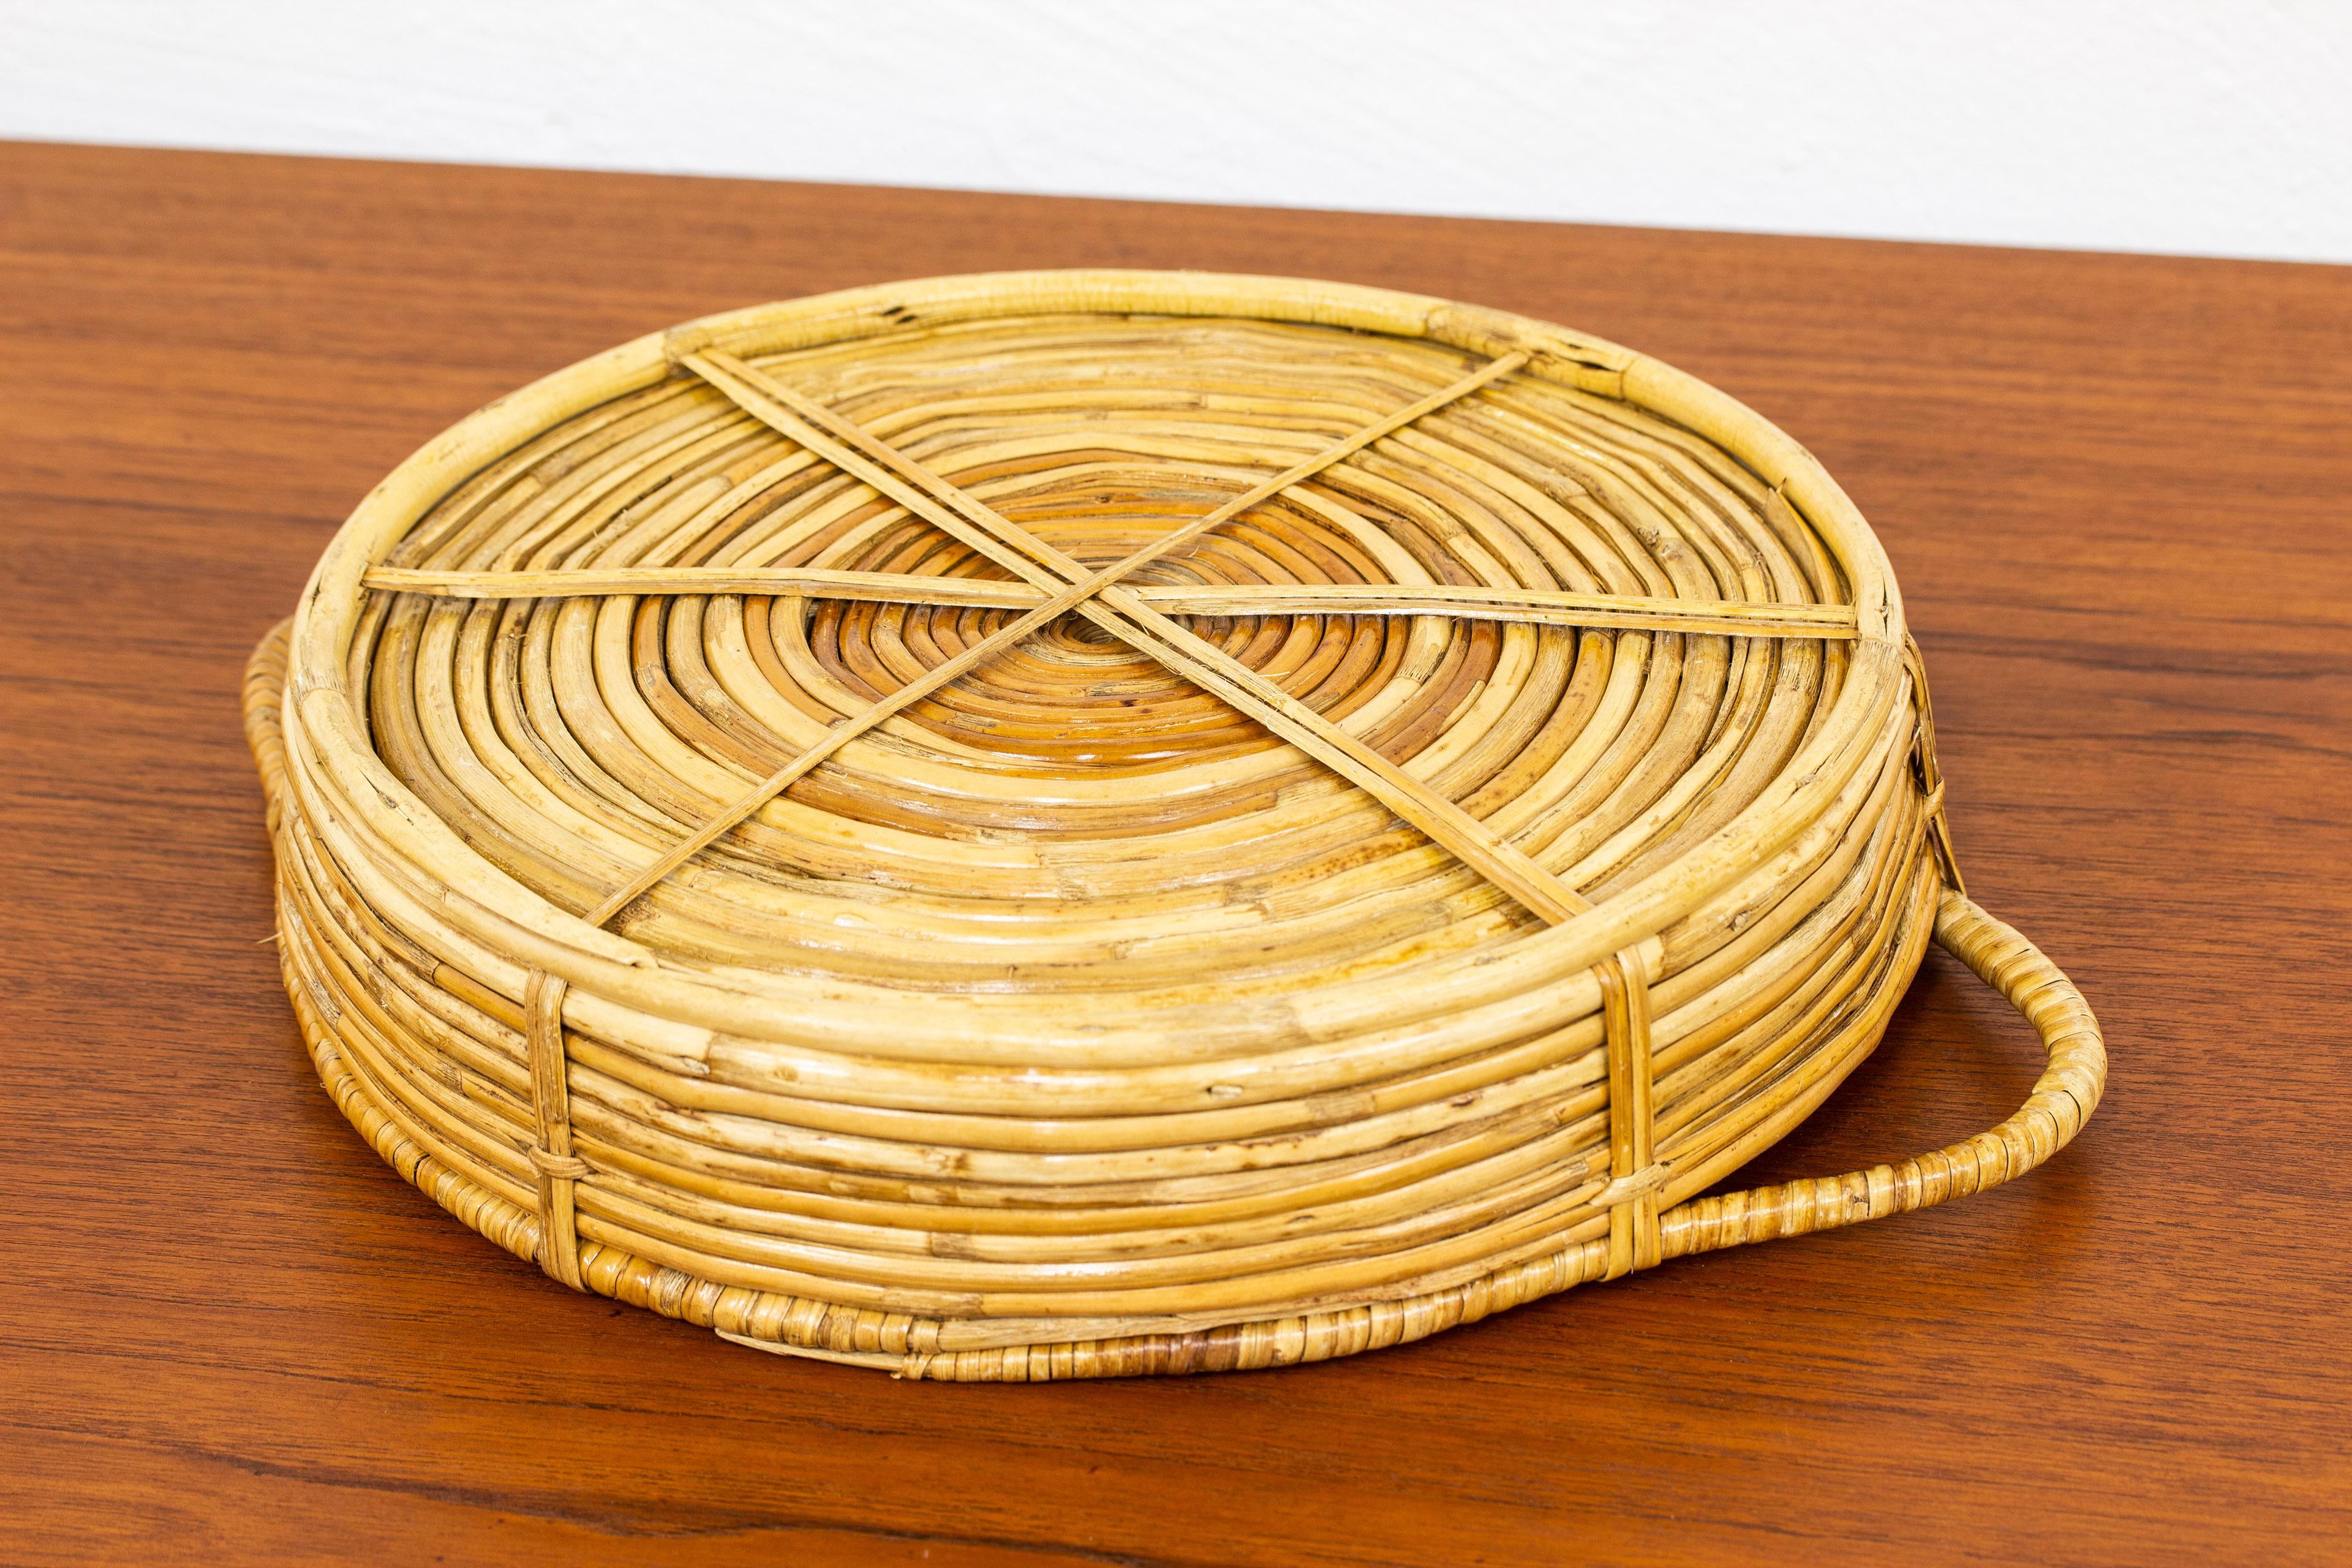 Hand woven basket or serving tray made in Finland during the 1950-60s. Hand made from cane. Very good vintage condition with few signs of age related wear and patina.

Dimensions: W. 40 D. 30 H. 7 cm